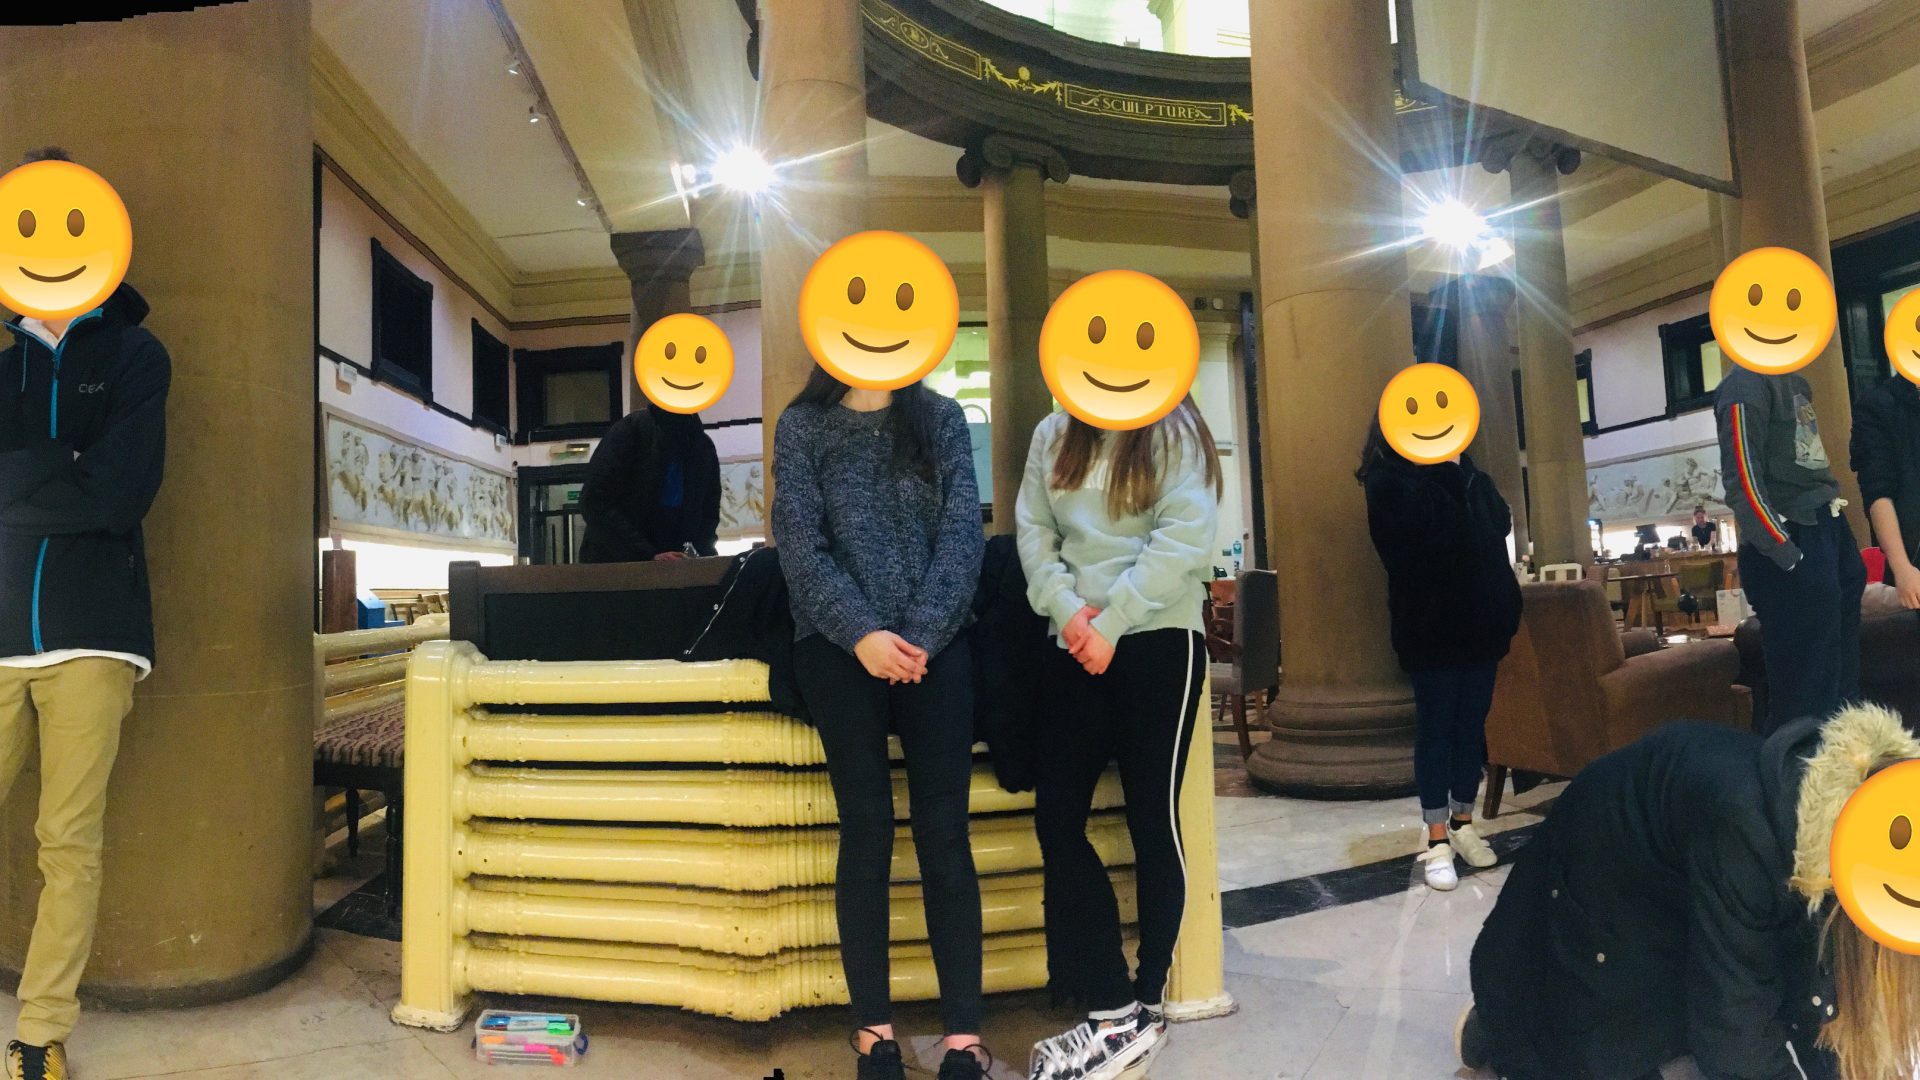 Group of young people stood in Harris Cafe - all of their faces are covered with a smiley face emoji.